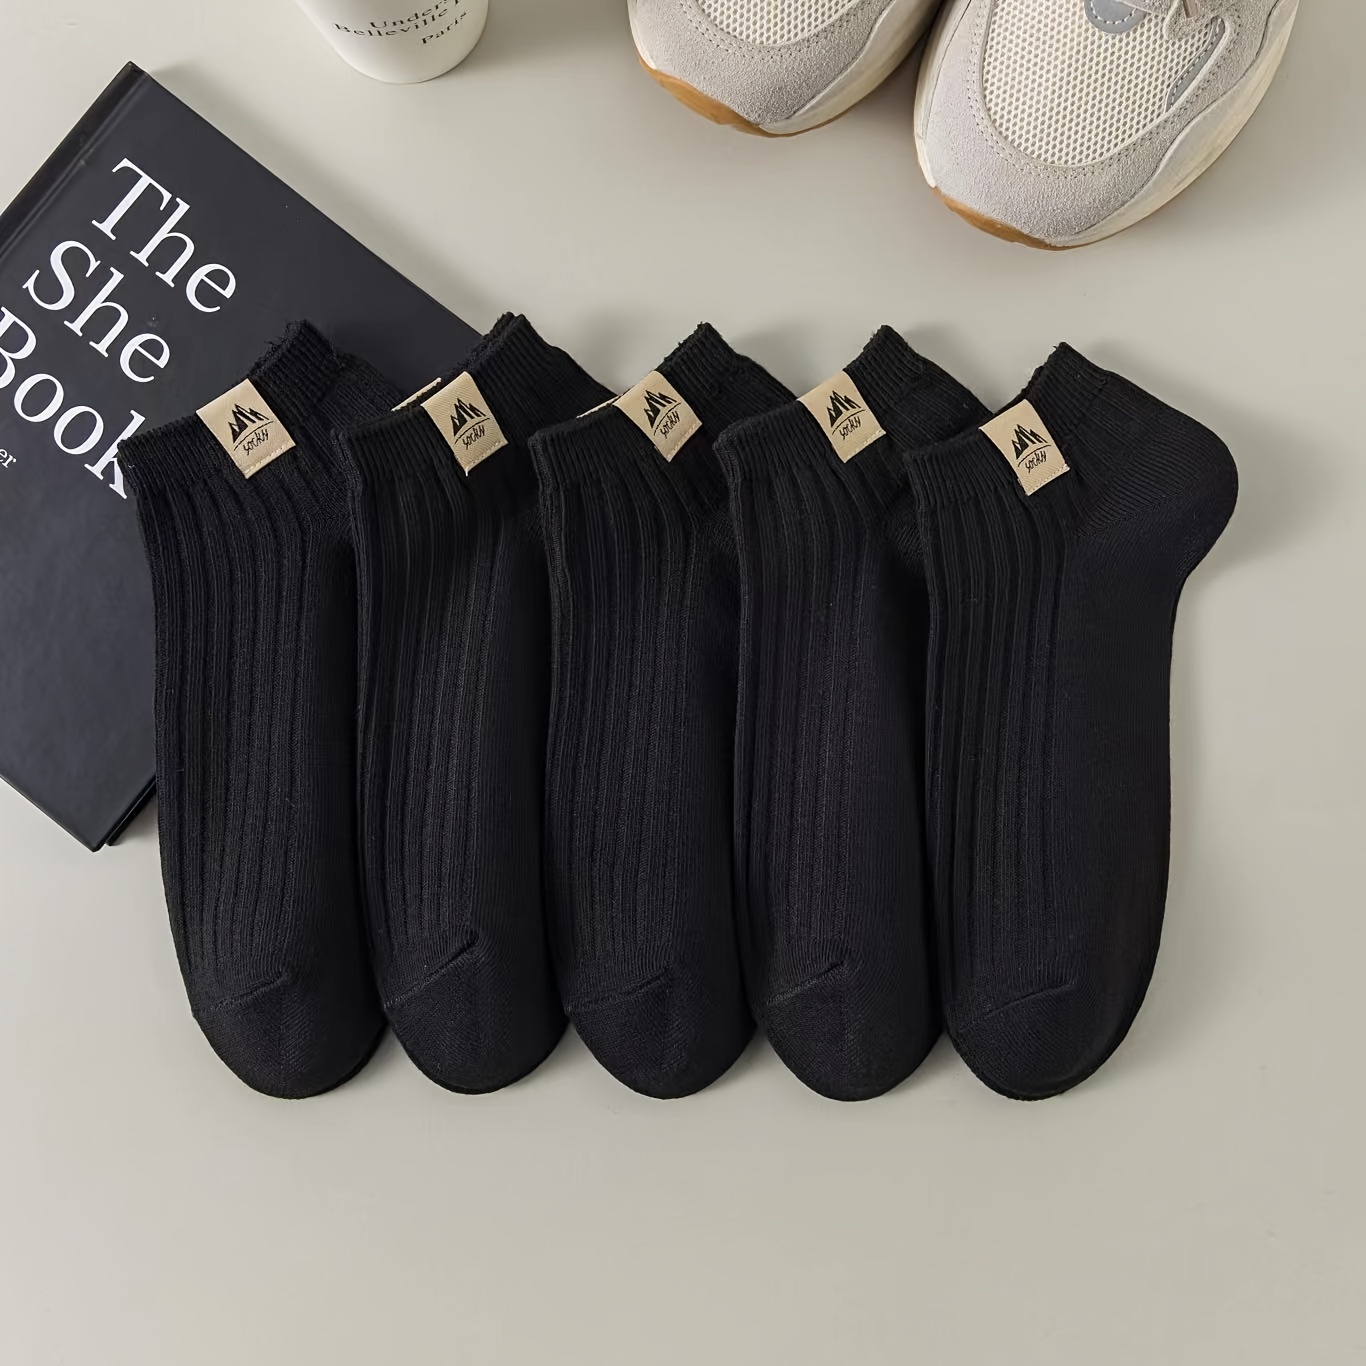 5 pairs of mens solid colour simple style anti odor sweat absorbing crew socks comfy breathable casual soft elastic socks spring summer details 5